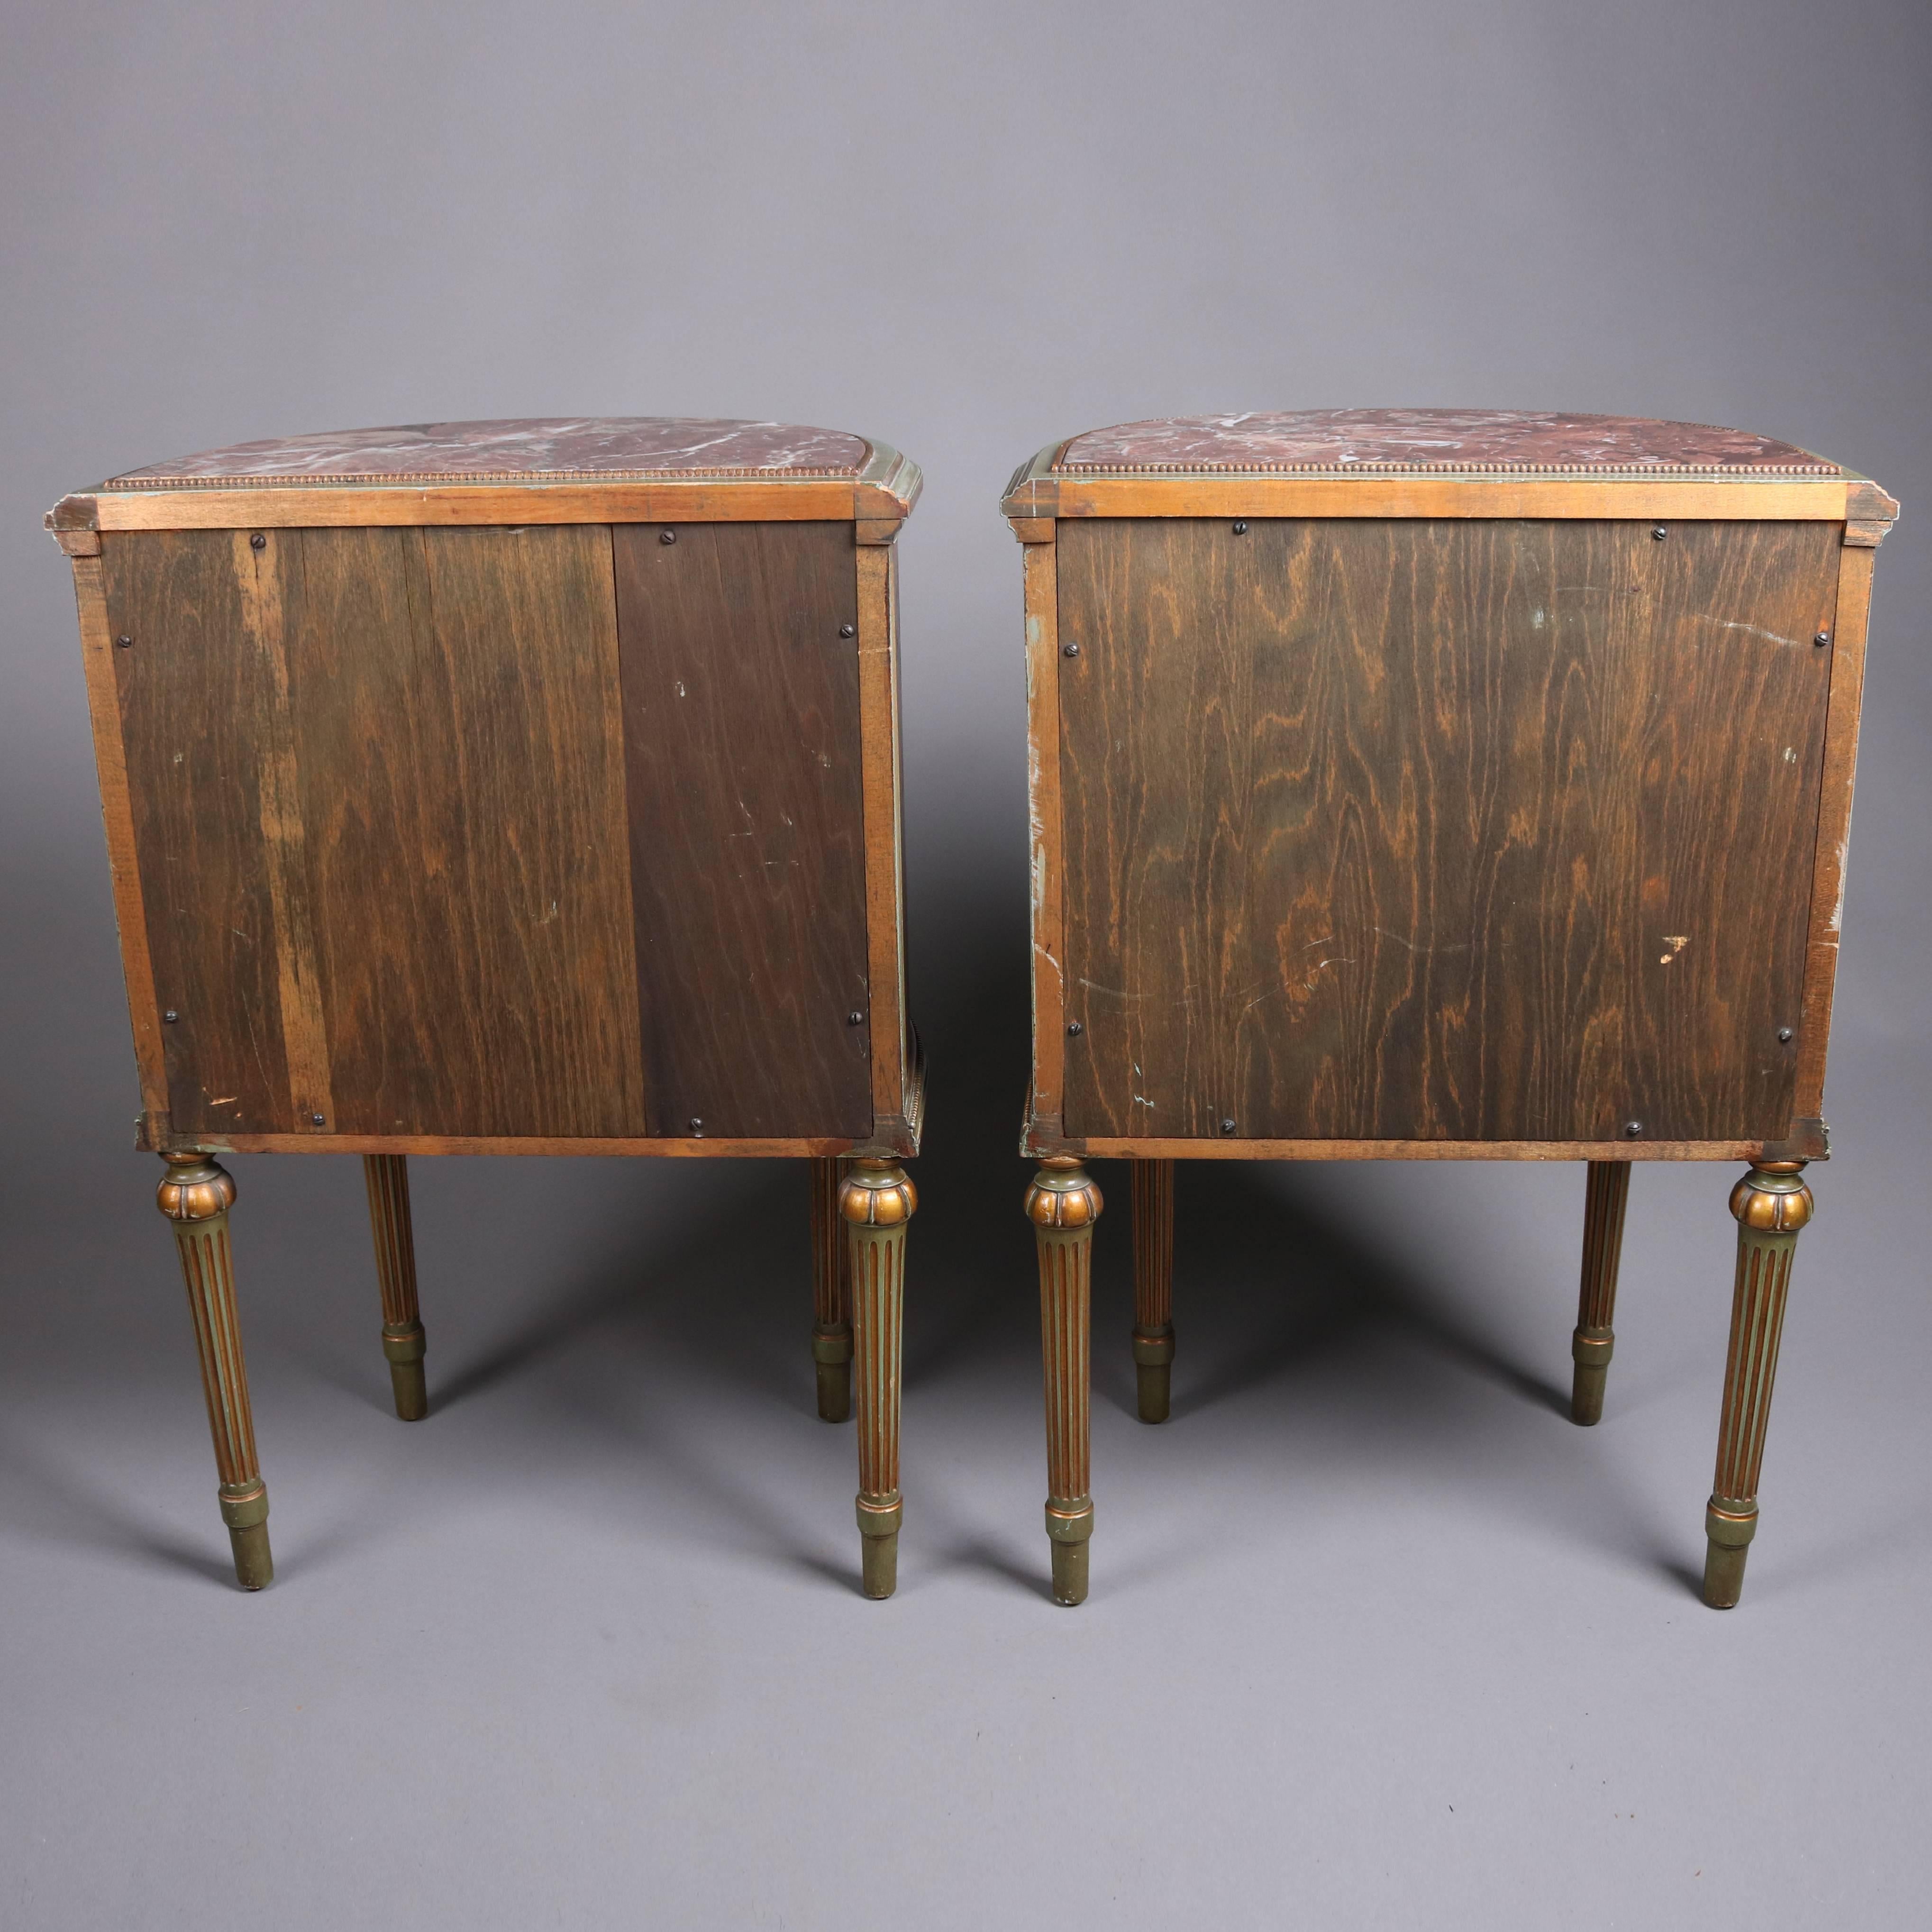 European Pair of Adam Style Classical Painted and Gilt Carved Satinwood Demilune Stands